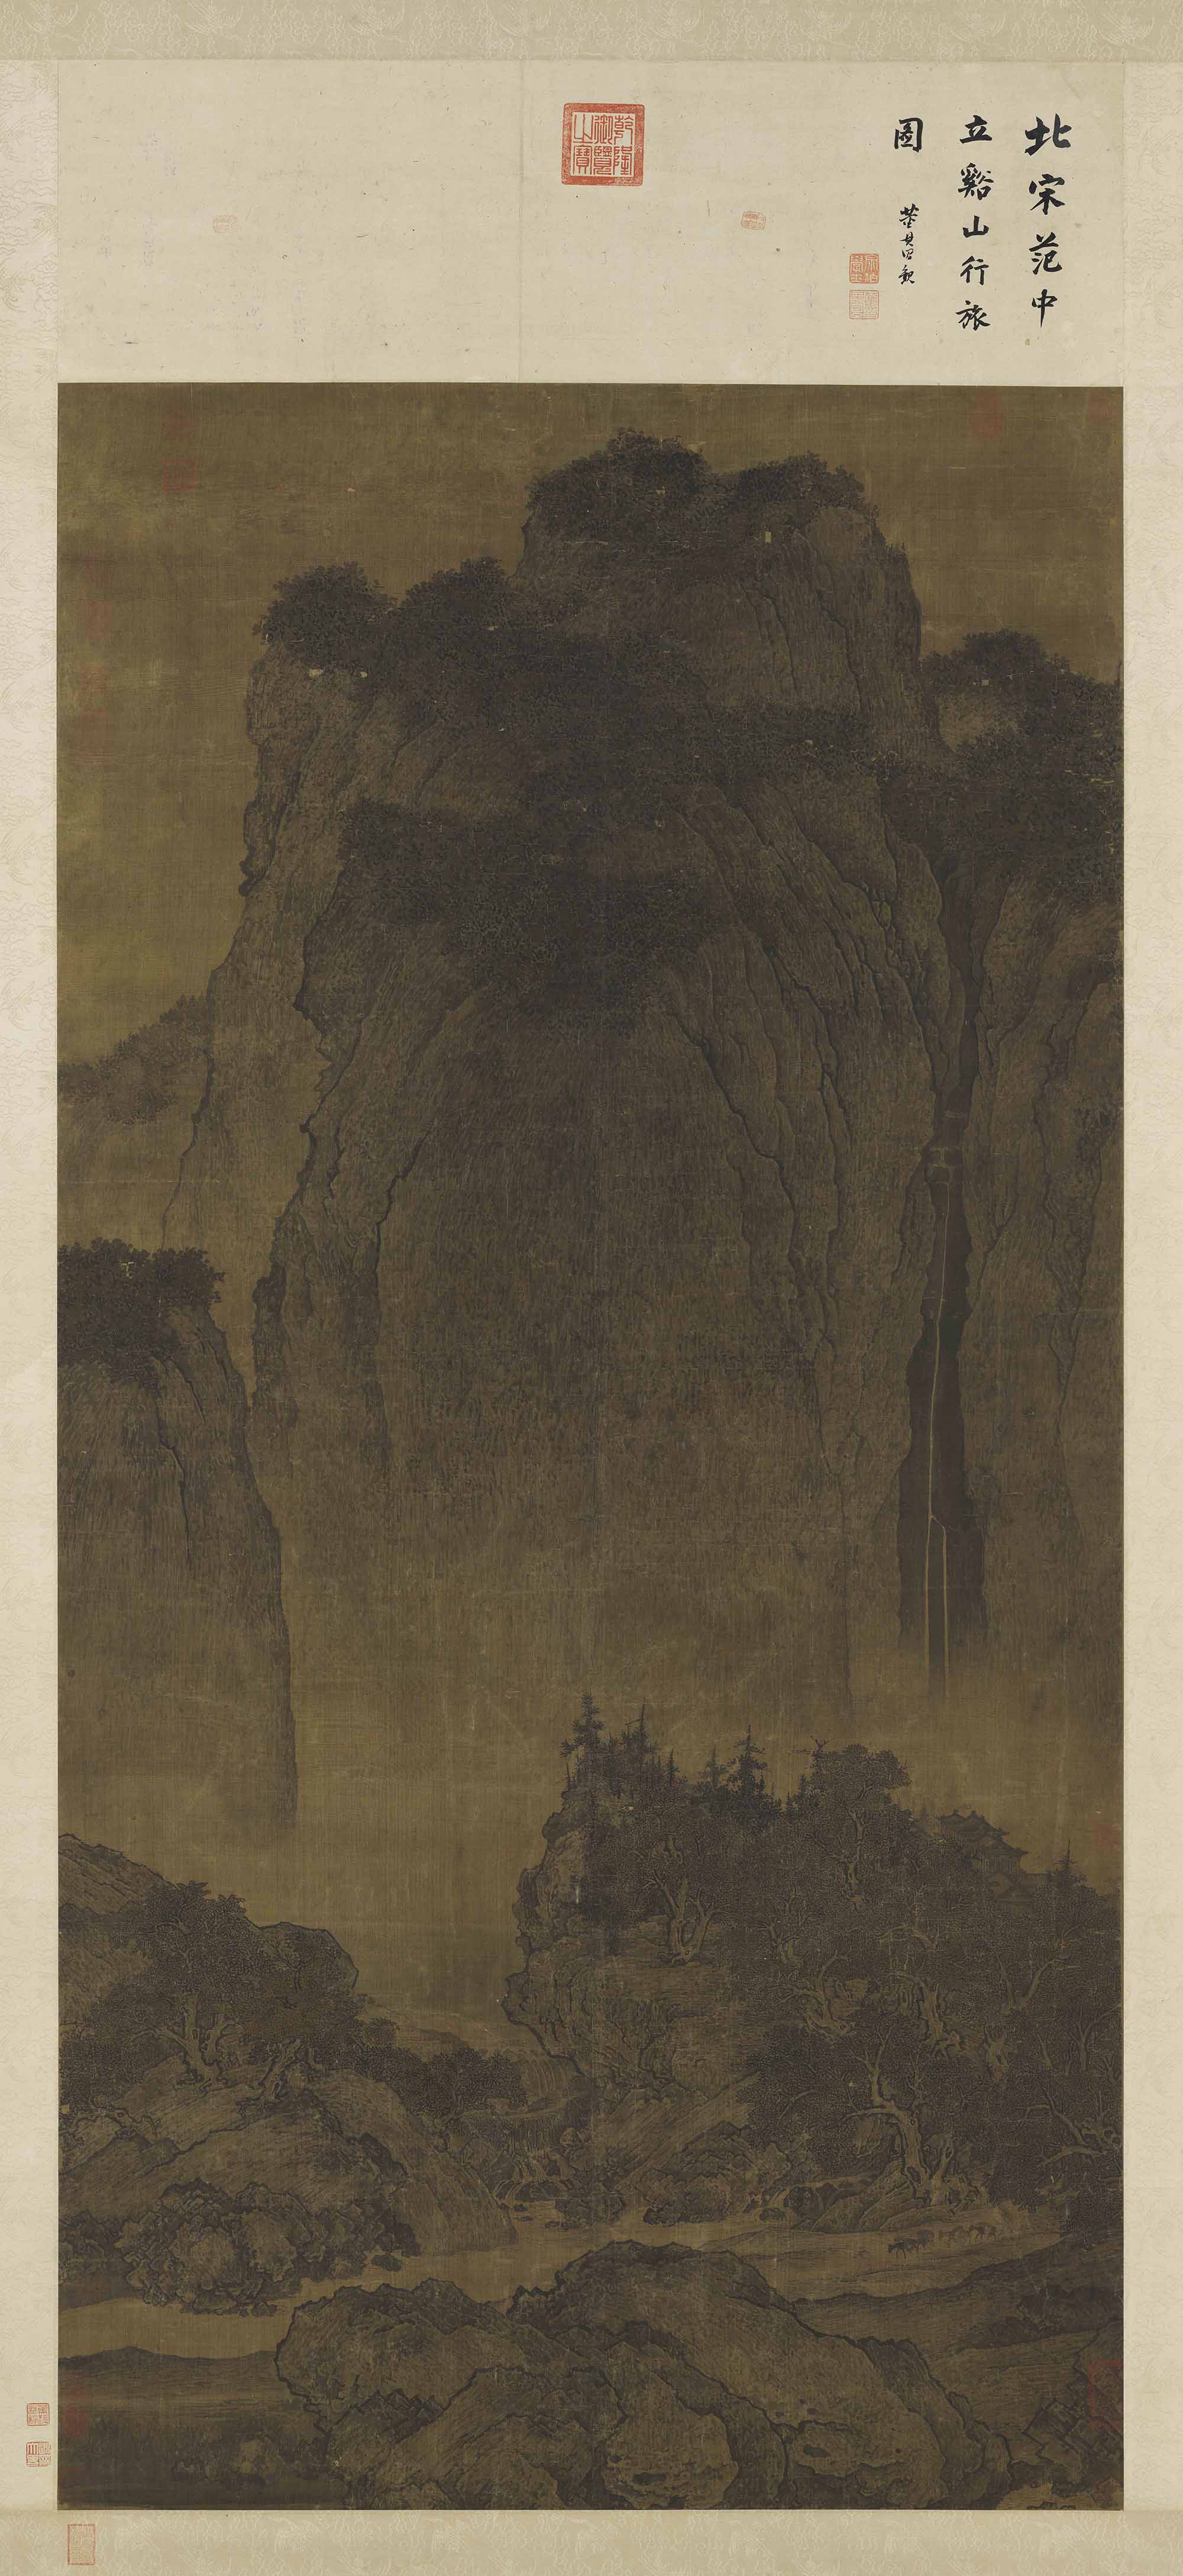 Travelers Among Mountains and Streams Fan Kuan (ca. 950-after 1032), Song dynasty